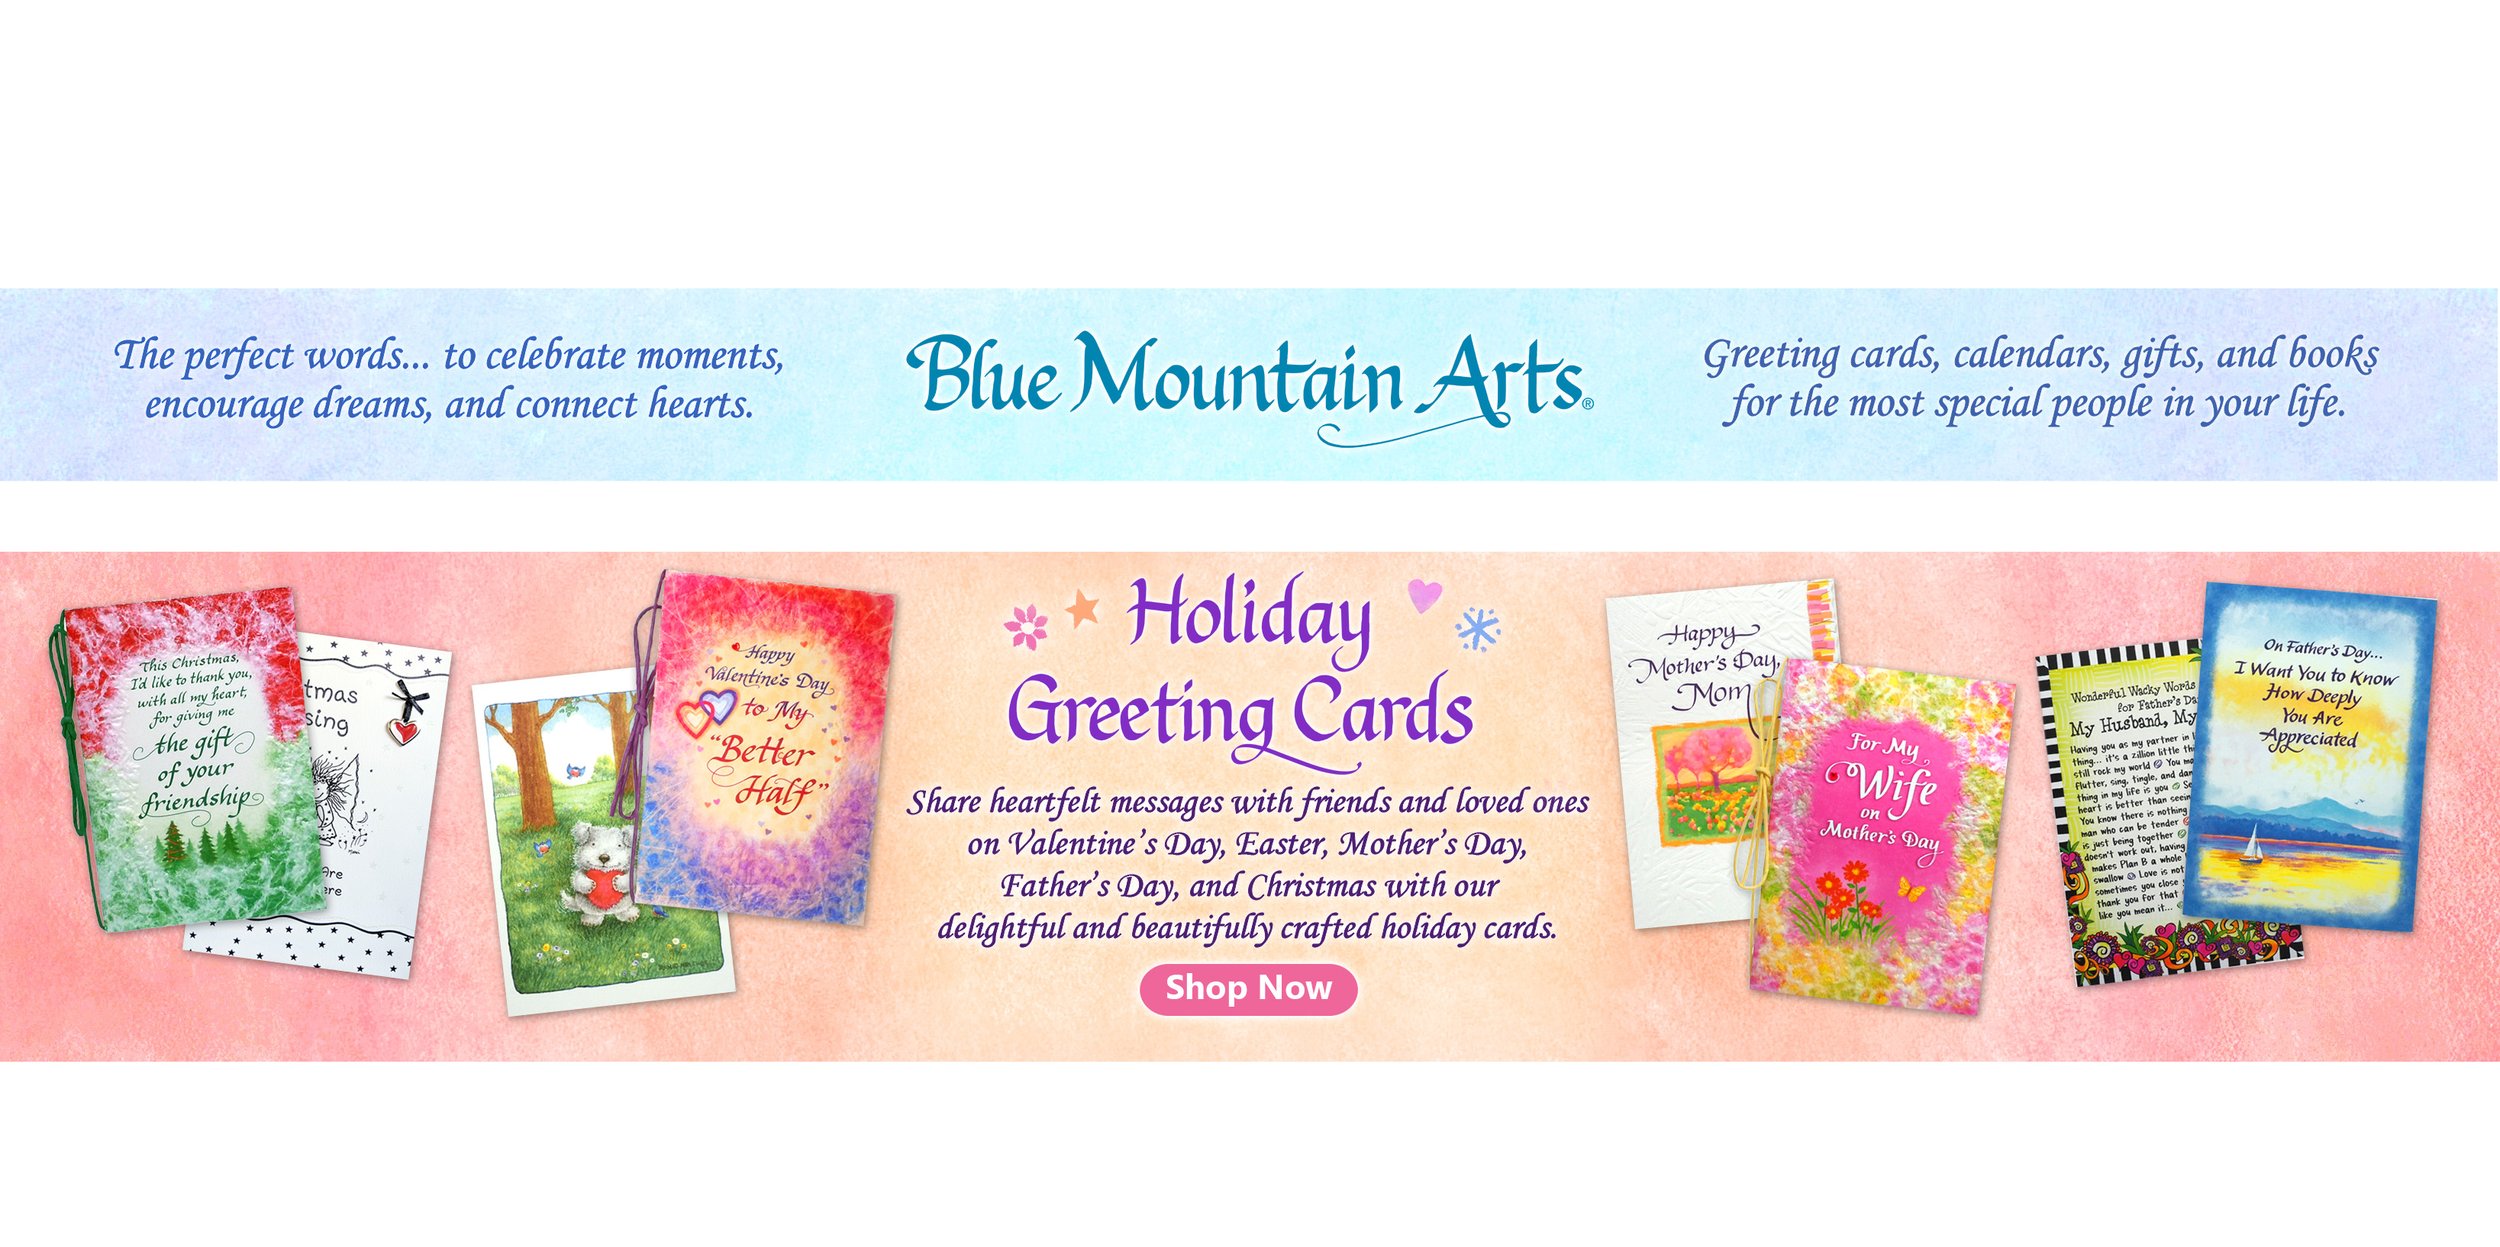 “This Christmas, I'd like to thank you, with all my heart, for giving me  the gift of your friendship” — Blue Mountain Arts